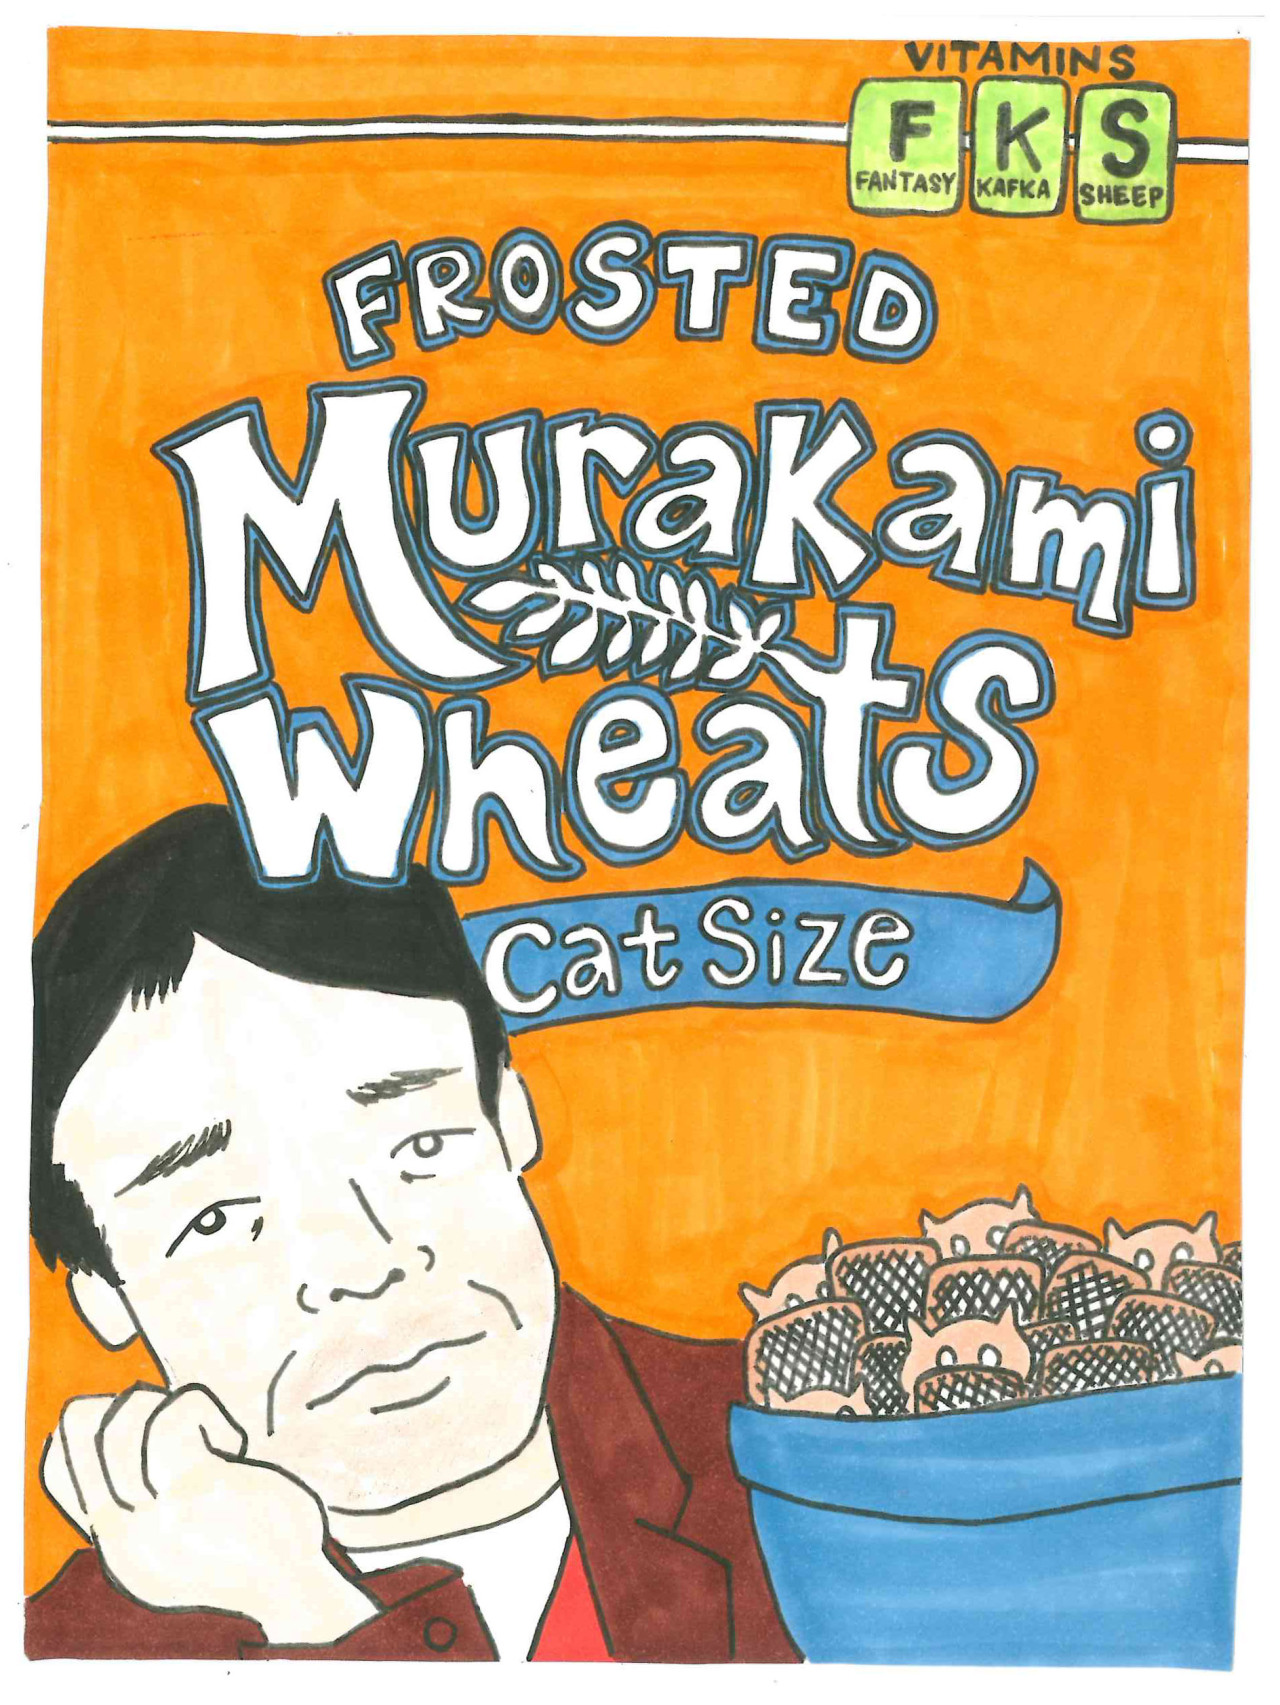 lastnightsreading:
“aaknopf:
“kategavino:
“Authors as Breakfast Cereal Mascots by Kate Gavino
”
Cat Sized Frosted Murakami Wheats!!
”
Never underestimate the amount of time I spend thinking about author name puns.
”